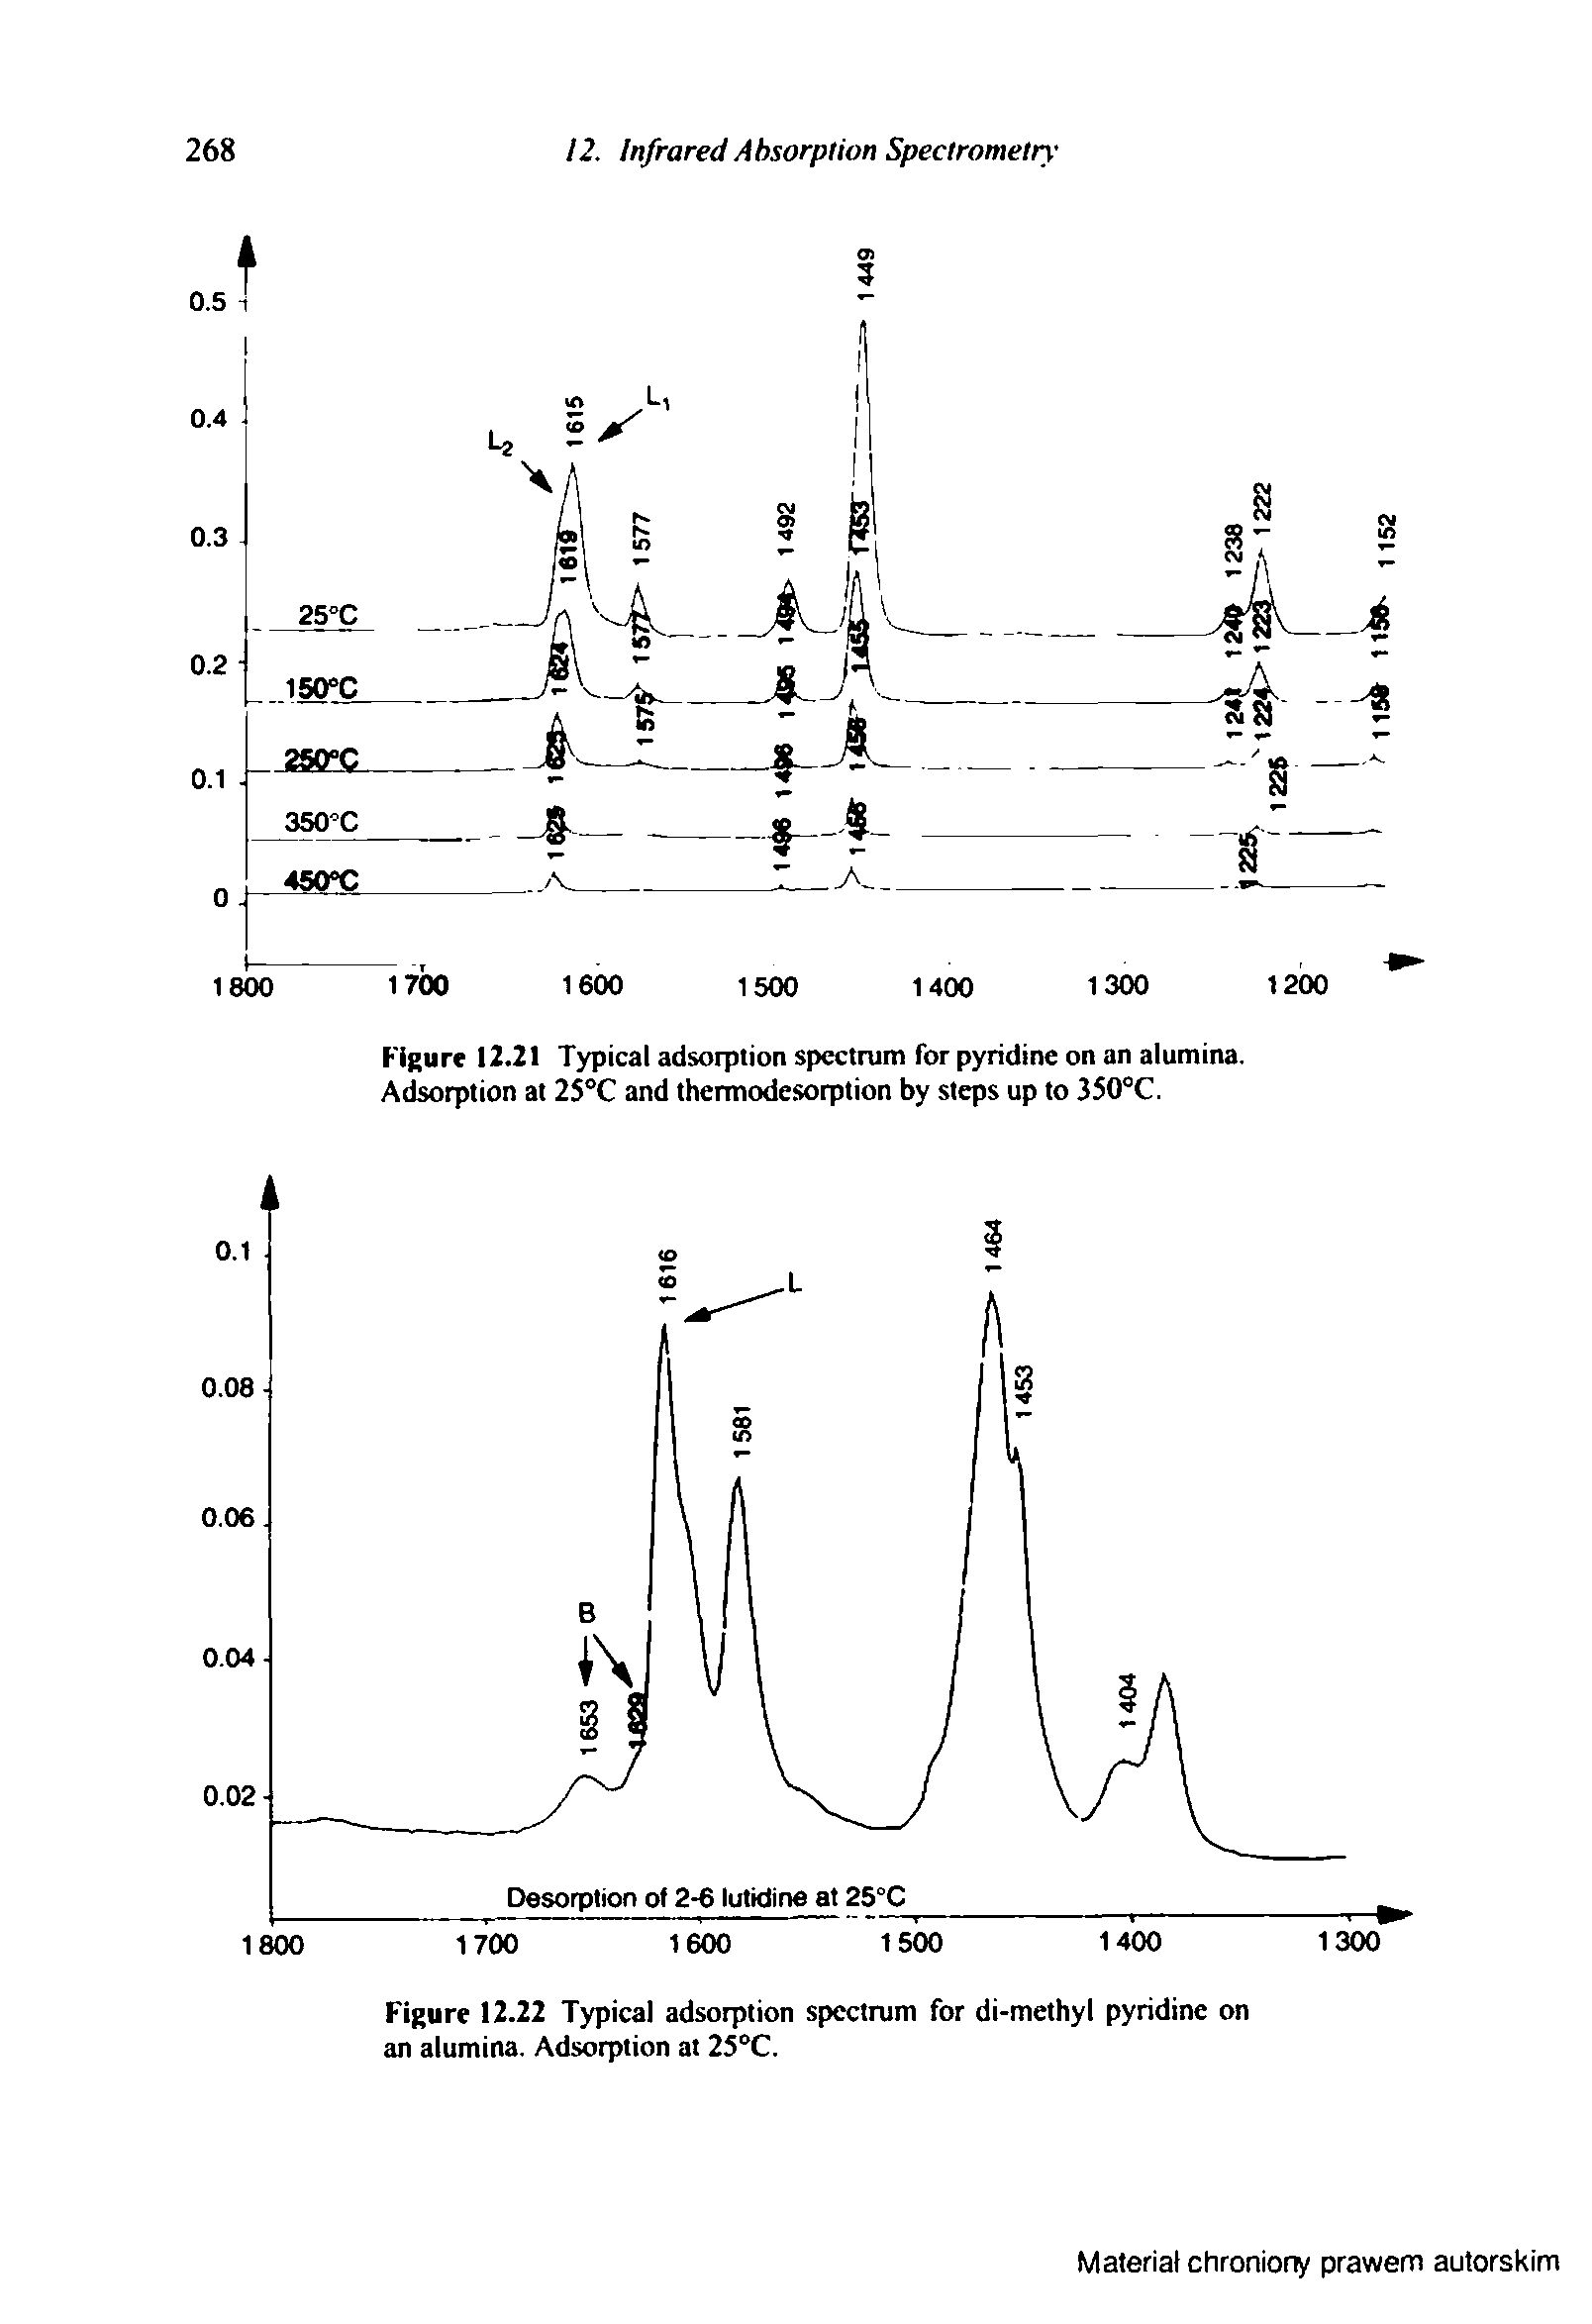 Figure 12.21 Typical adsorption spectrum for pyridine on an alumina. Adsorption at 25 C and thermodesorption by steps up to 350°C.